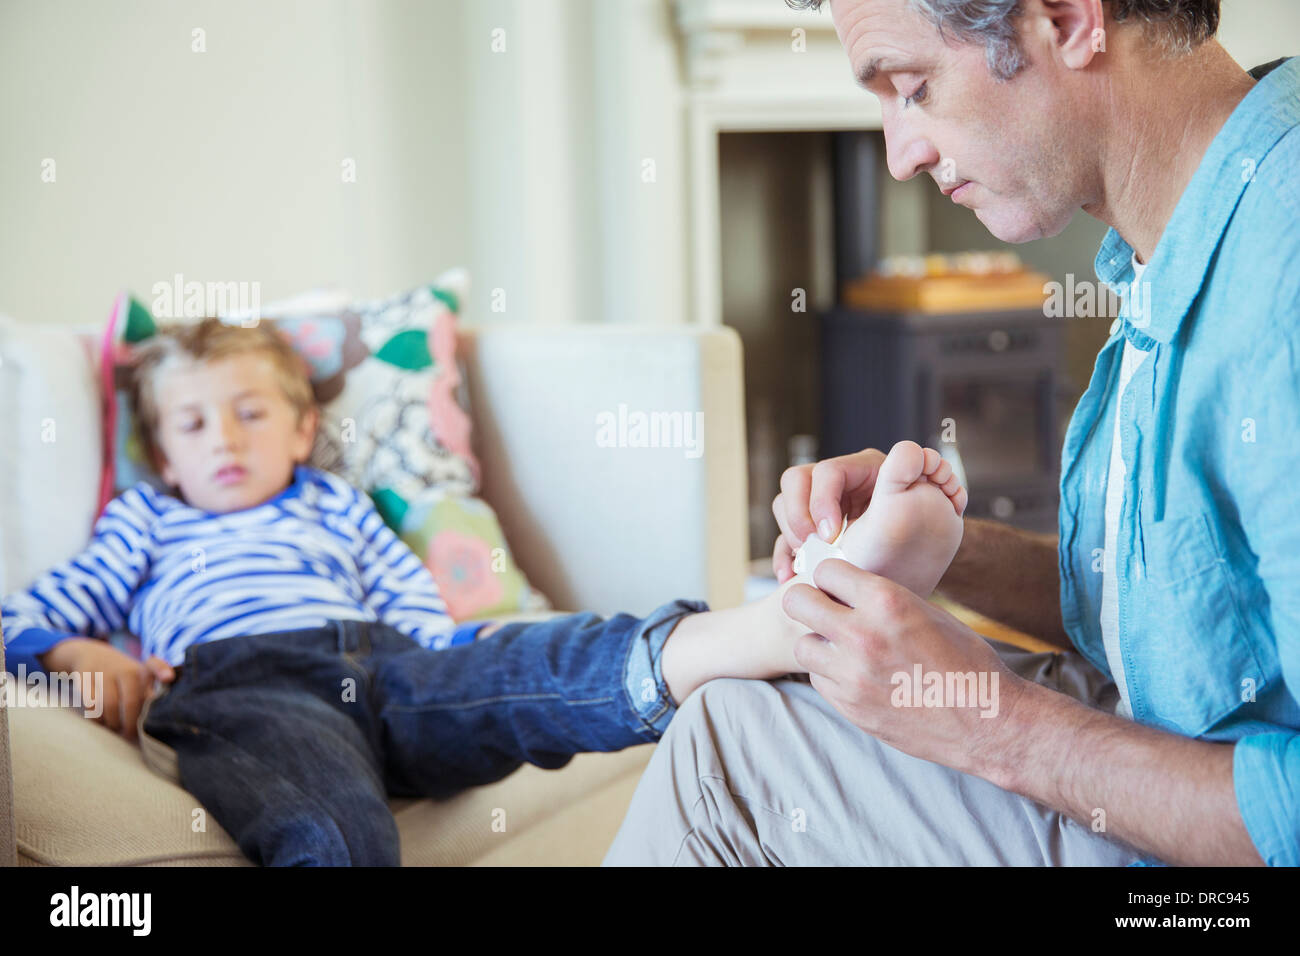 Father bandaging son's foot Stock Photo